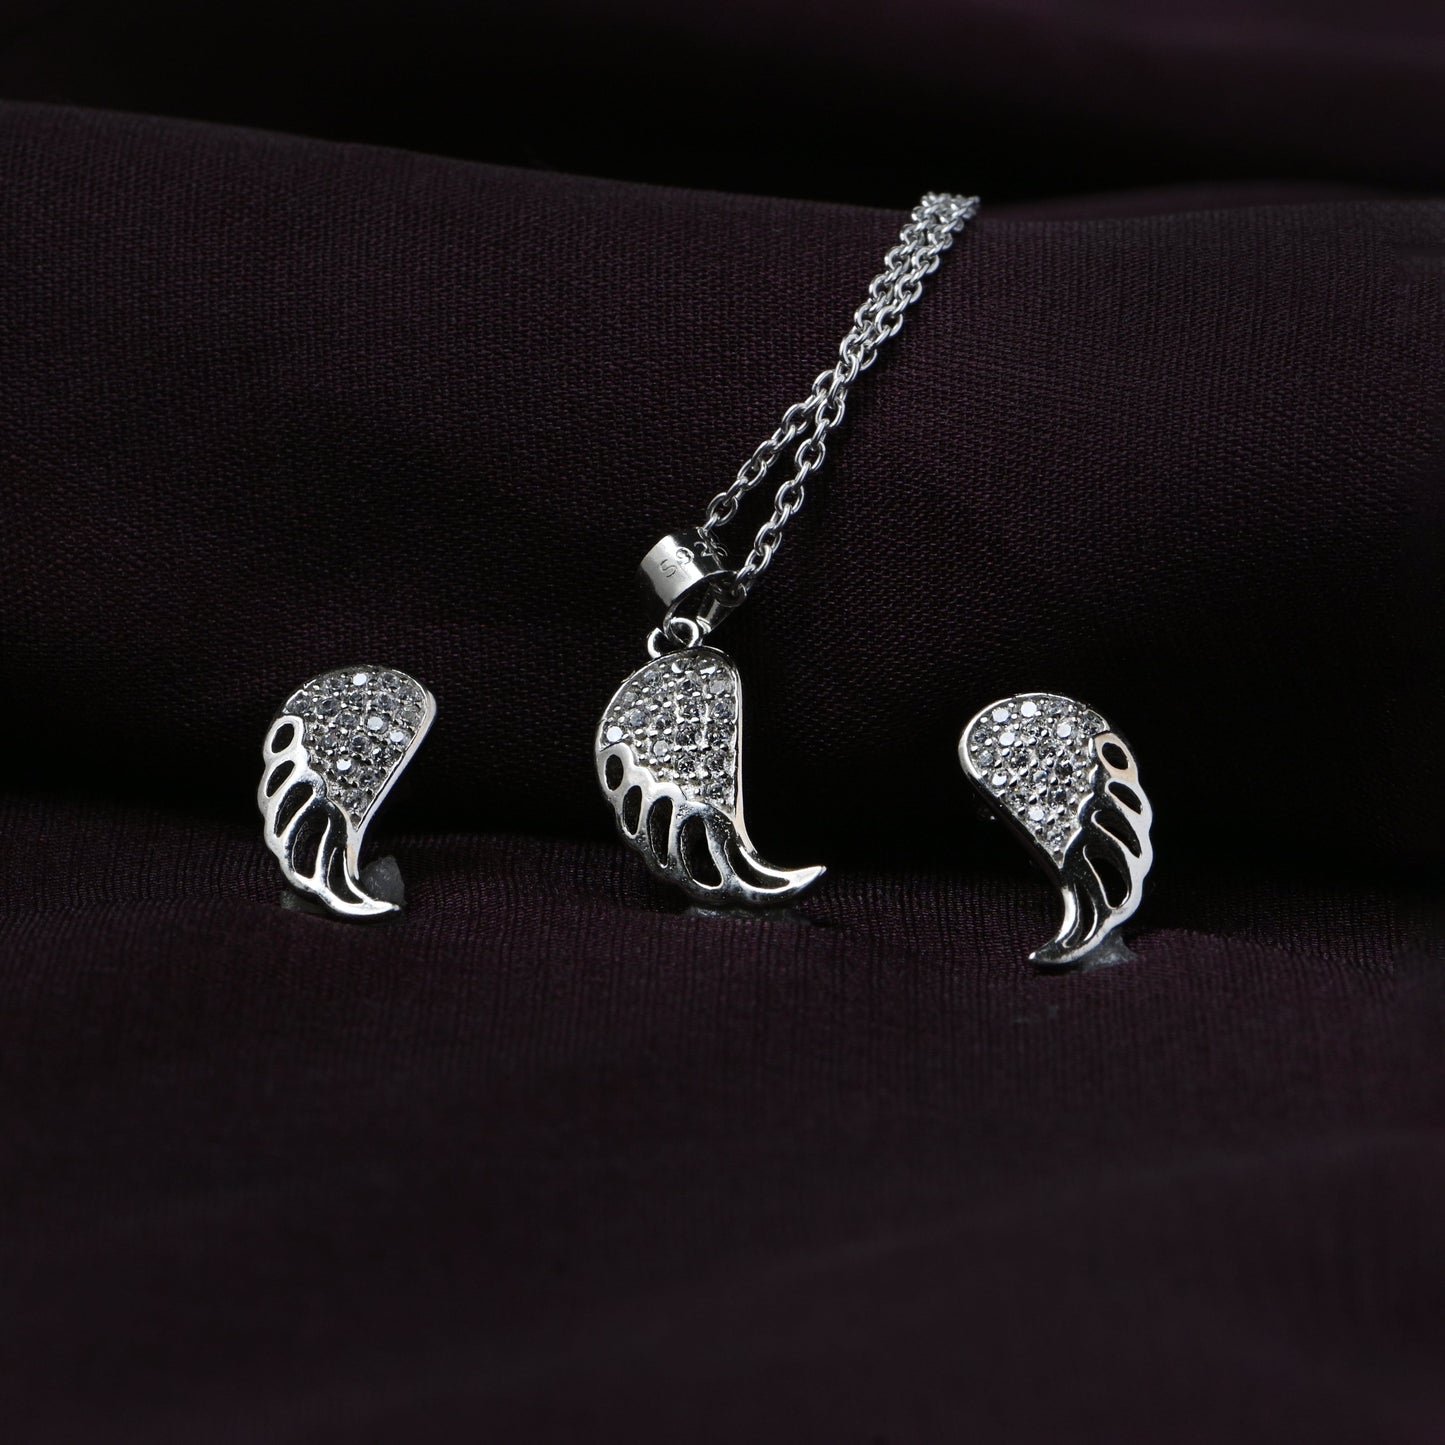 Silver Zircon Studded Leaf Sets with Link Chain